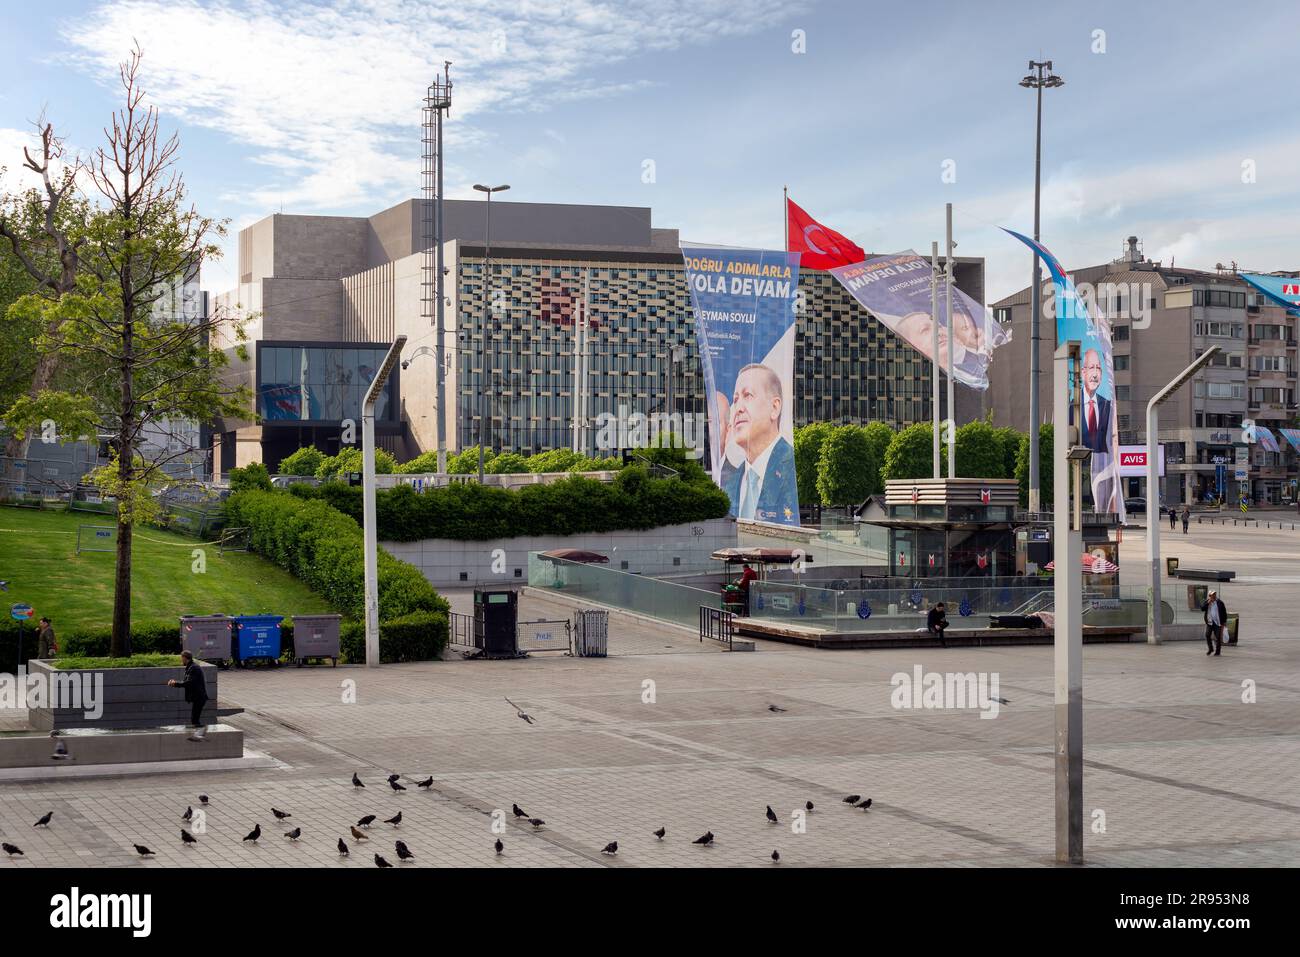 Istanbul, Turkey - May 13, 2023: Taksim Square, or Taksim Meydani one day before the 2023 presidential elections, with banners supporting candidates and Ataturk Cultural Center in the background Stock Photo